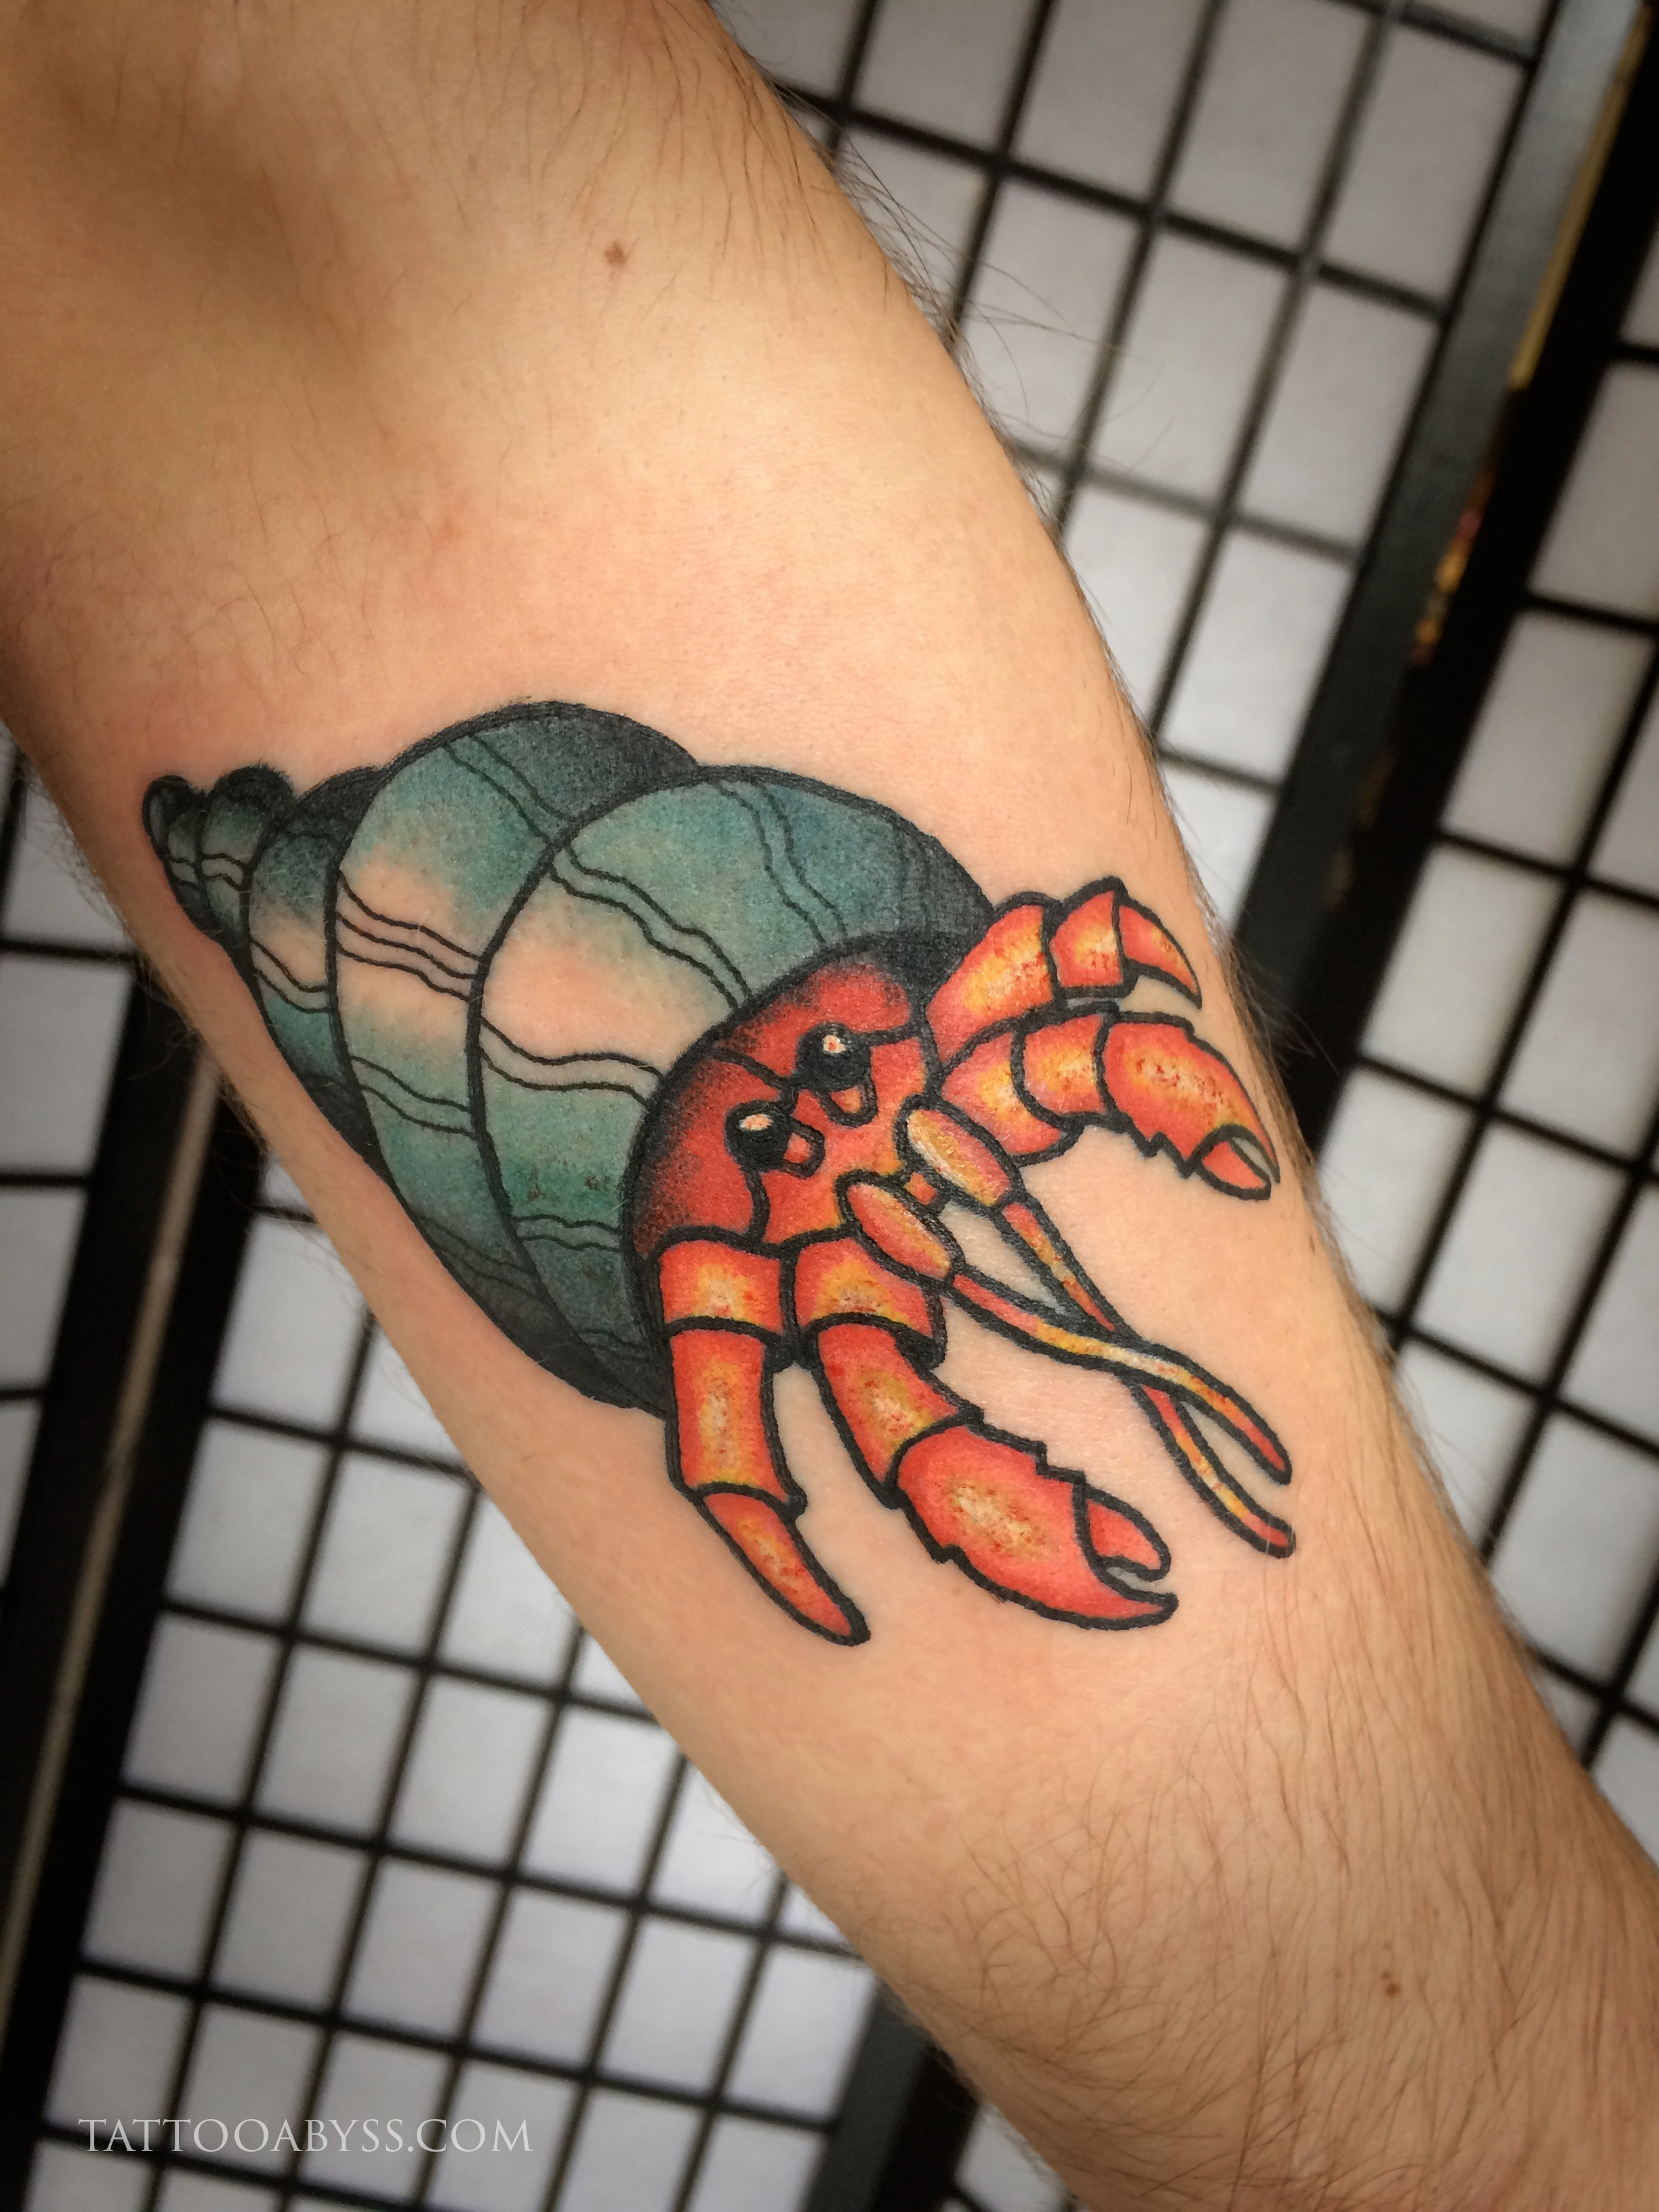 Hermit Crab - Tattoo Abyss Montreal